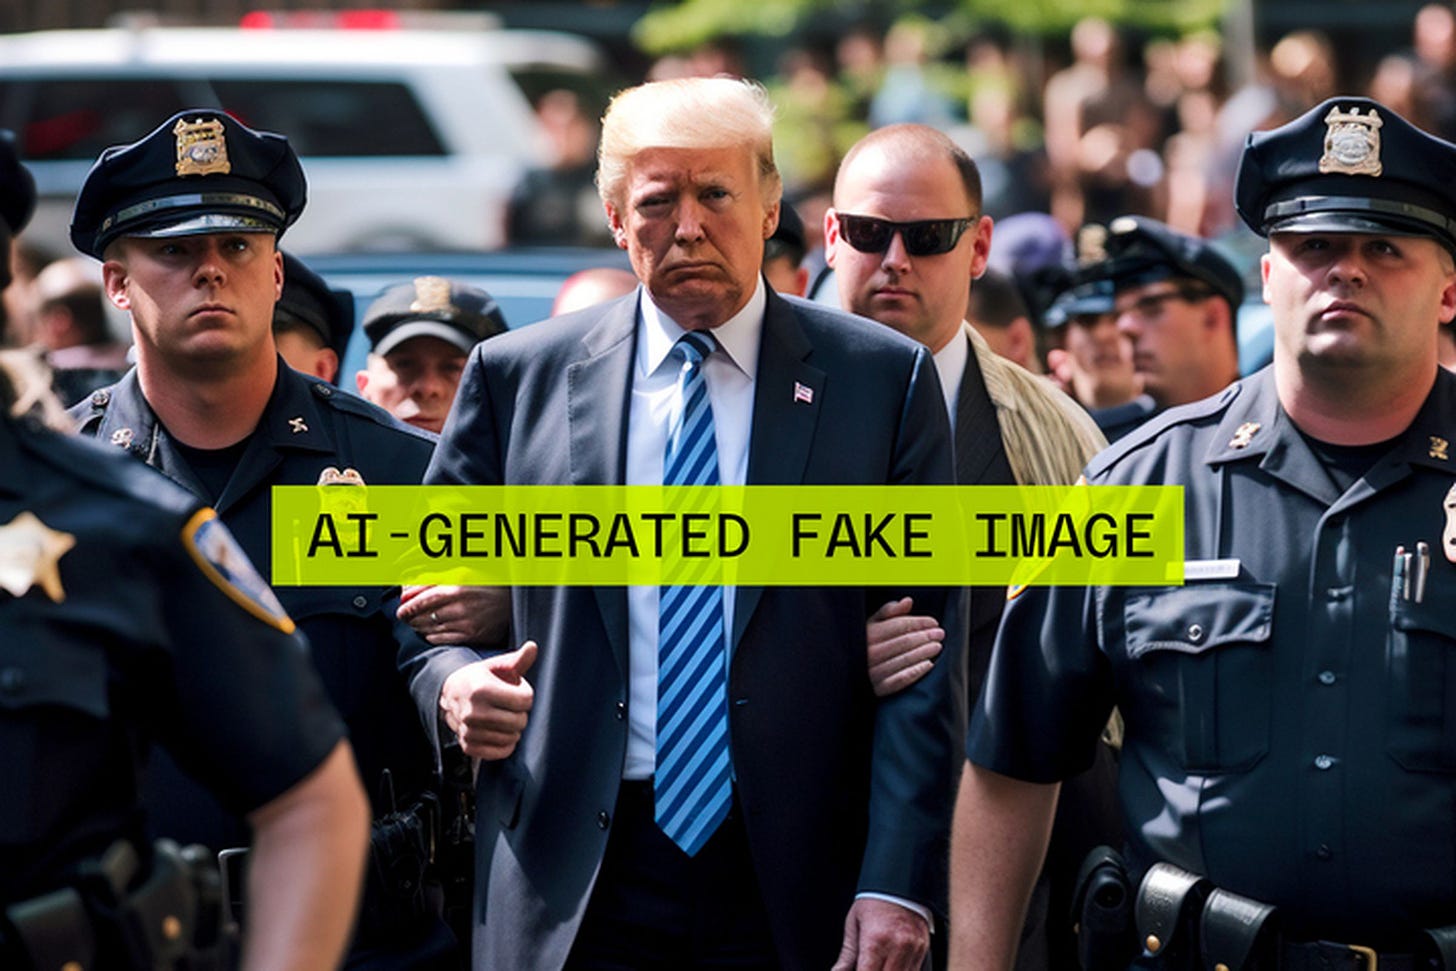 An AI generated image of Donald Trump being arrested, with an overlay that says “AI-generated fake image.”